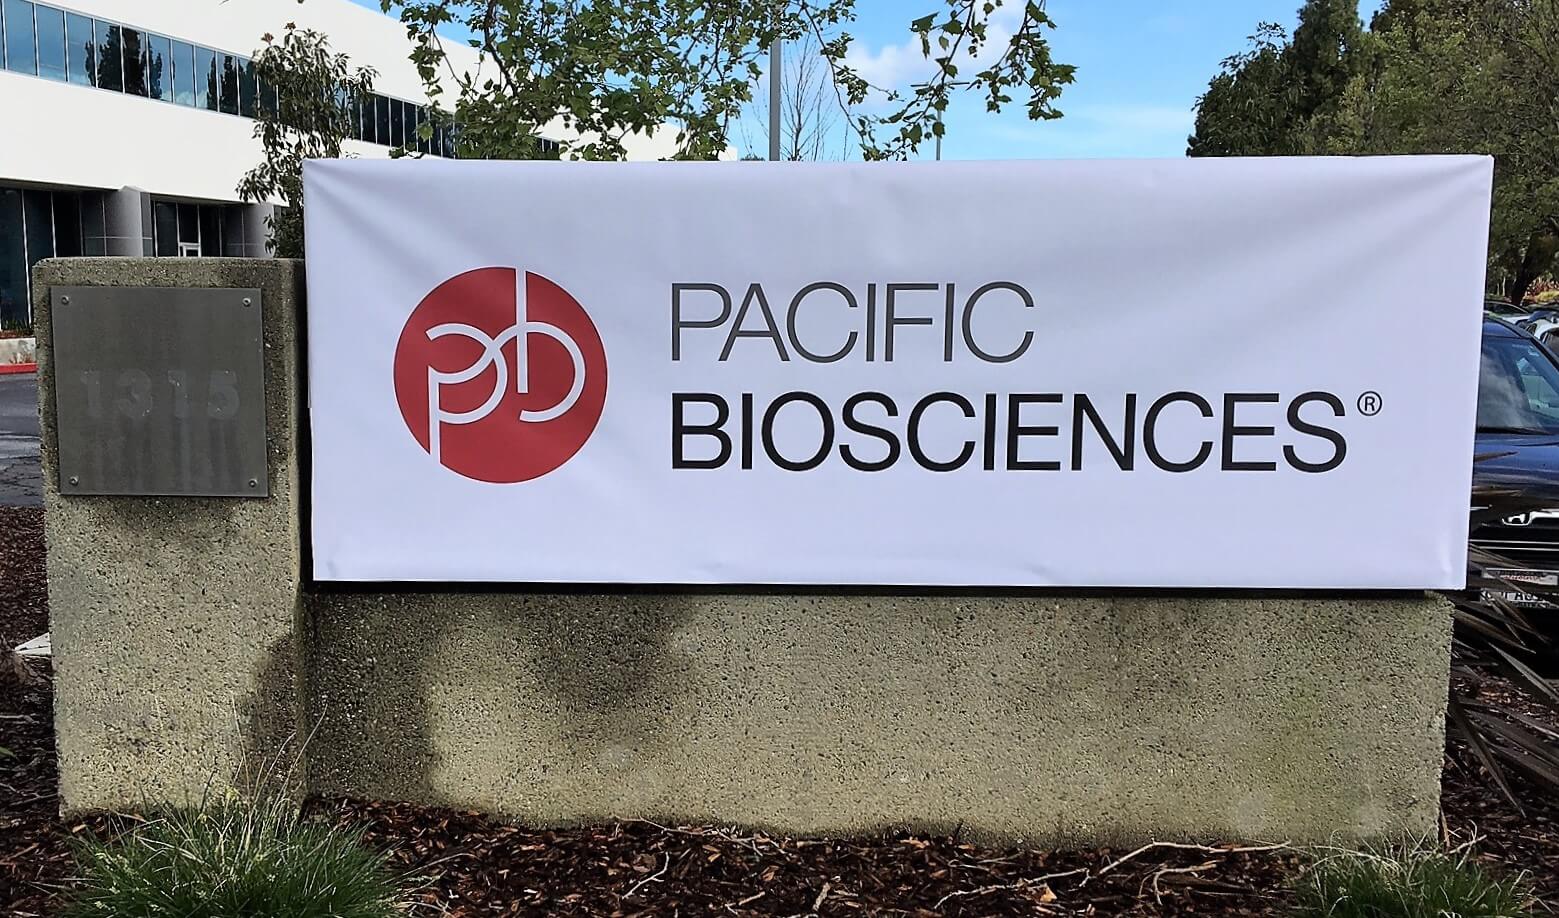 Illumina Acquires Pacific Biosciences for ~$1.2B with its Sequel SMRT Technology